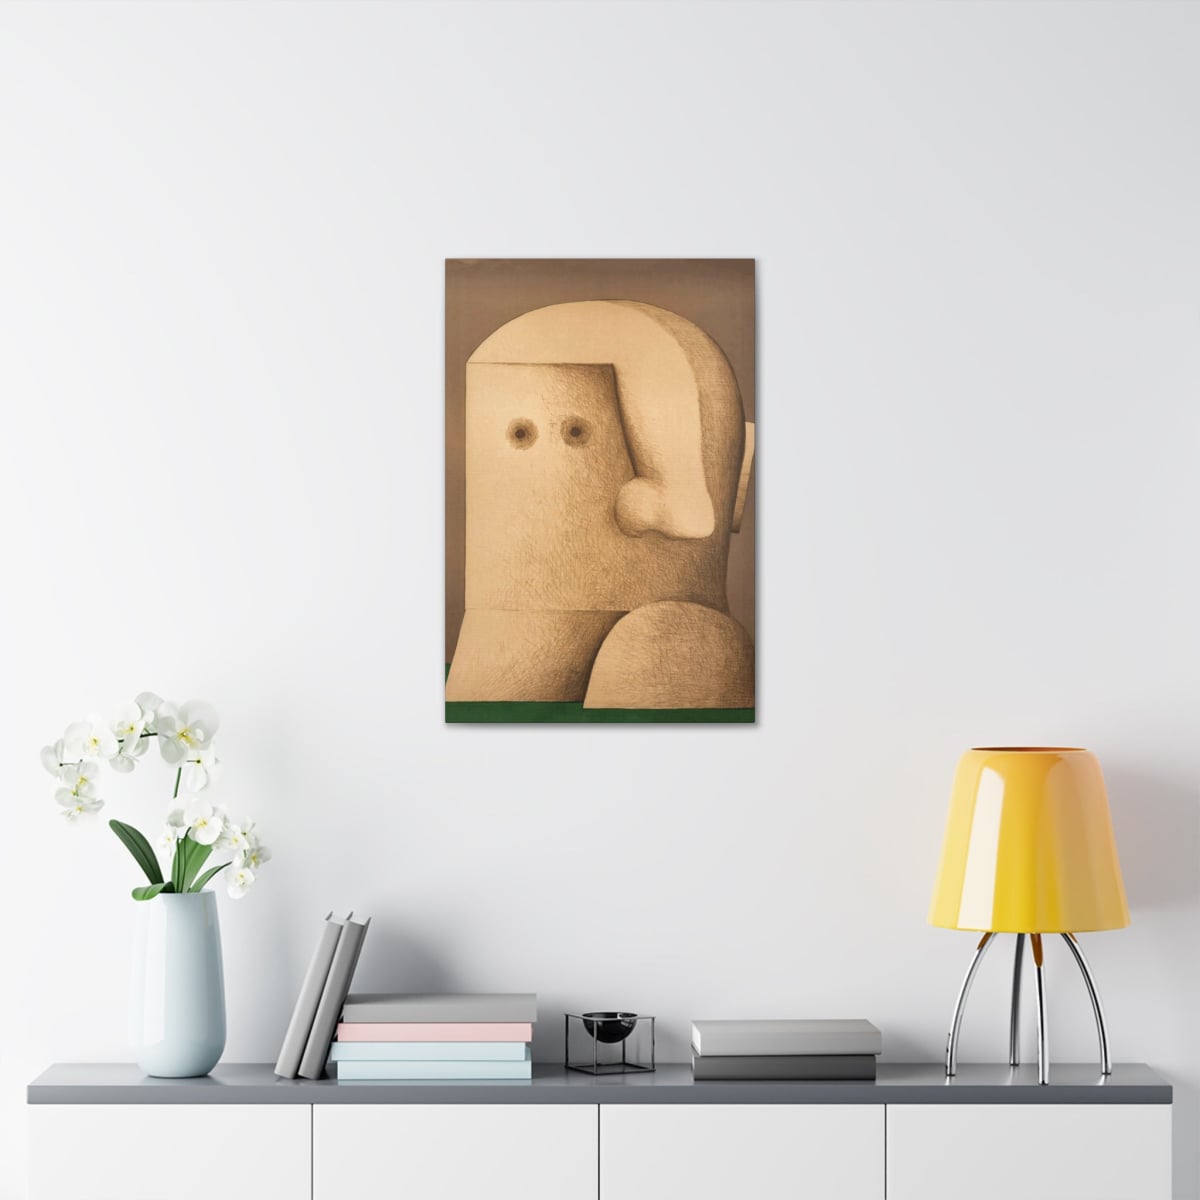 Colorful Abstract Wall Decor